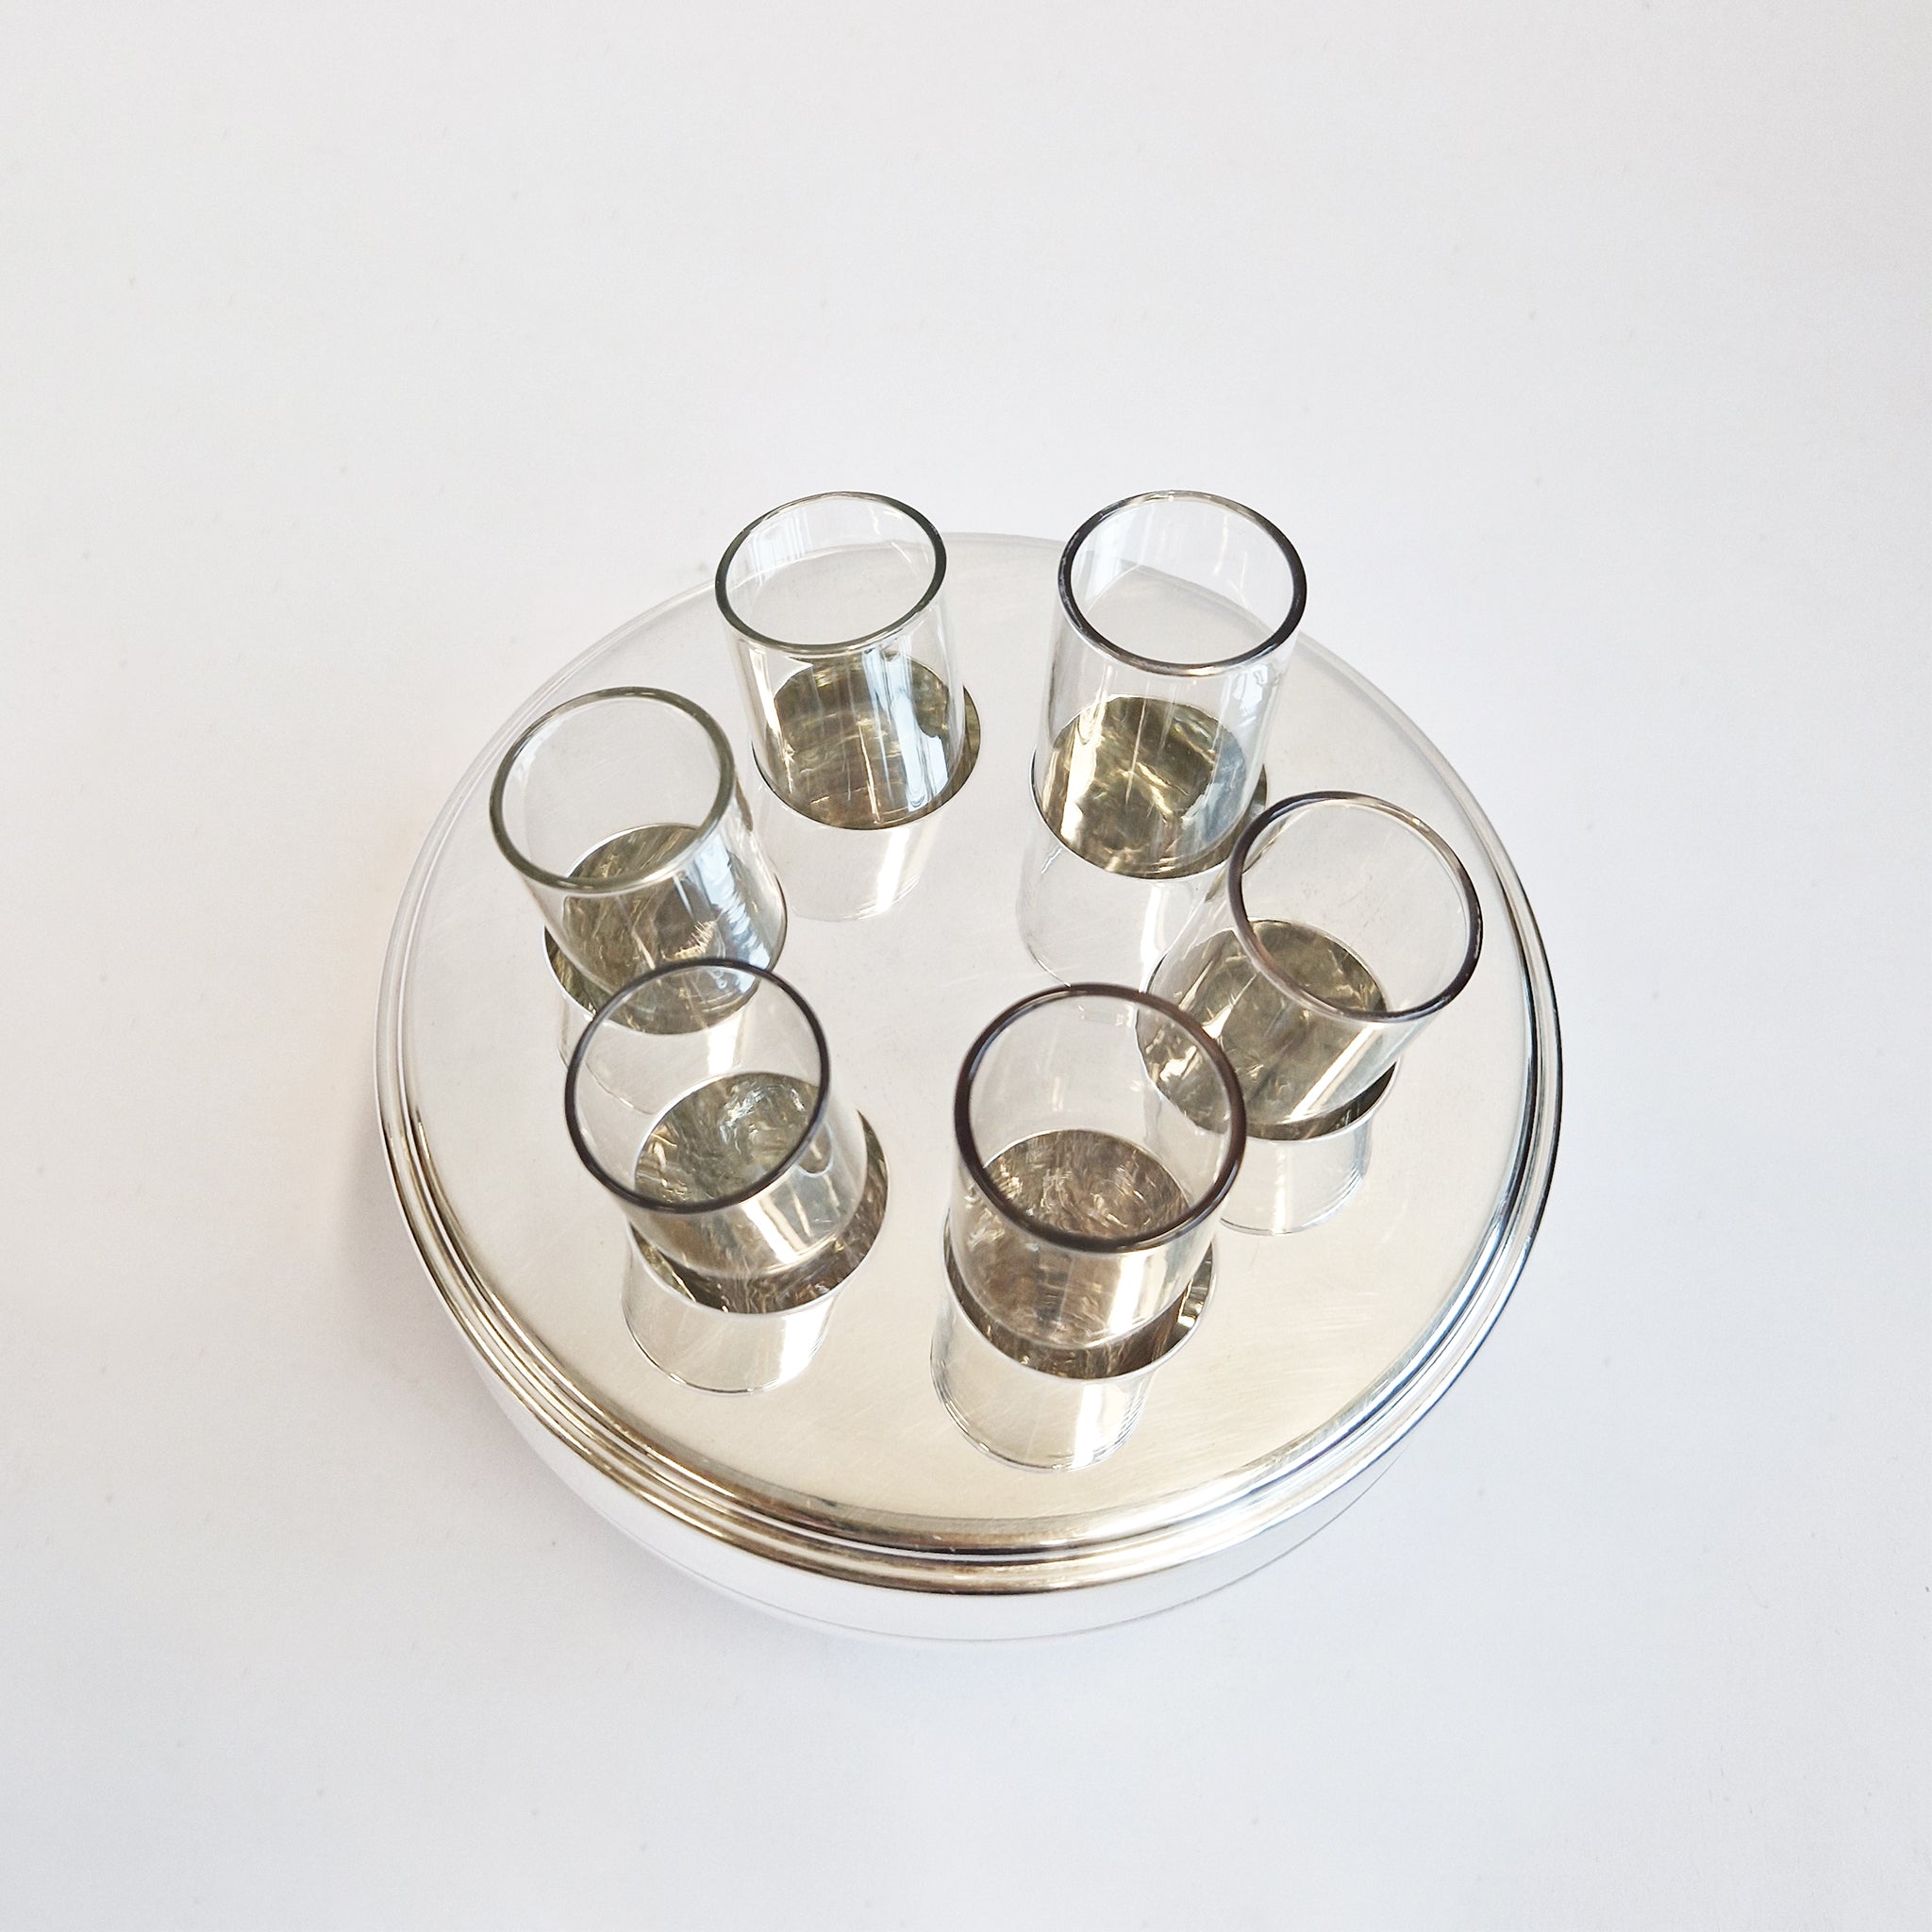 Vintage silver plated shot glass holder by LARAS Italy